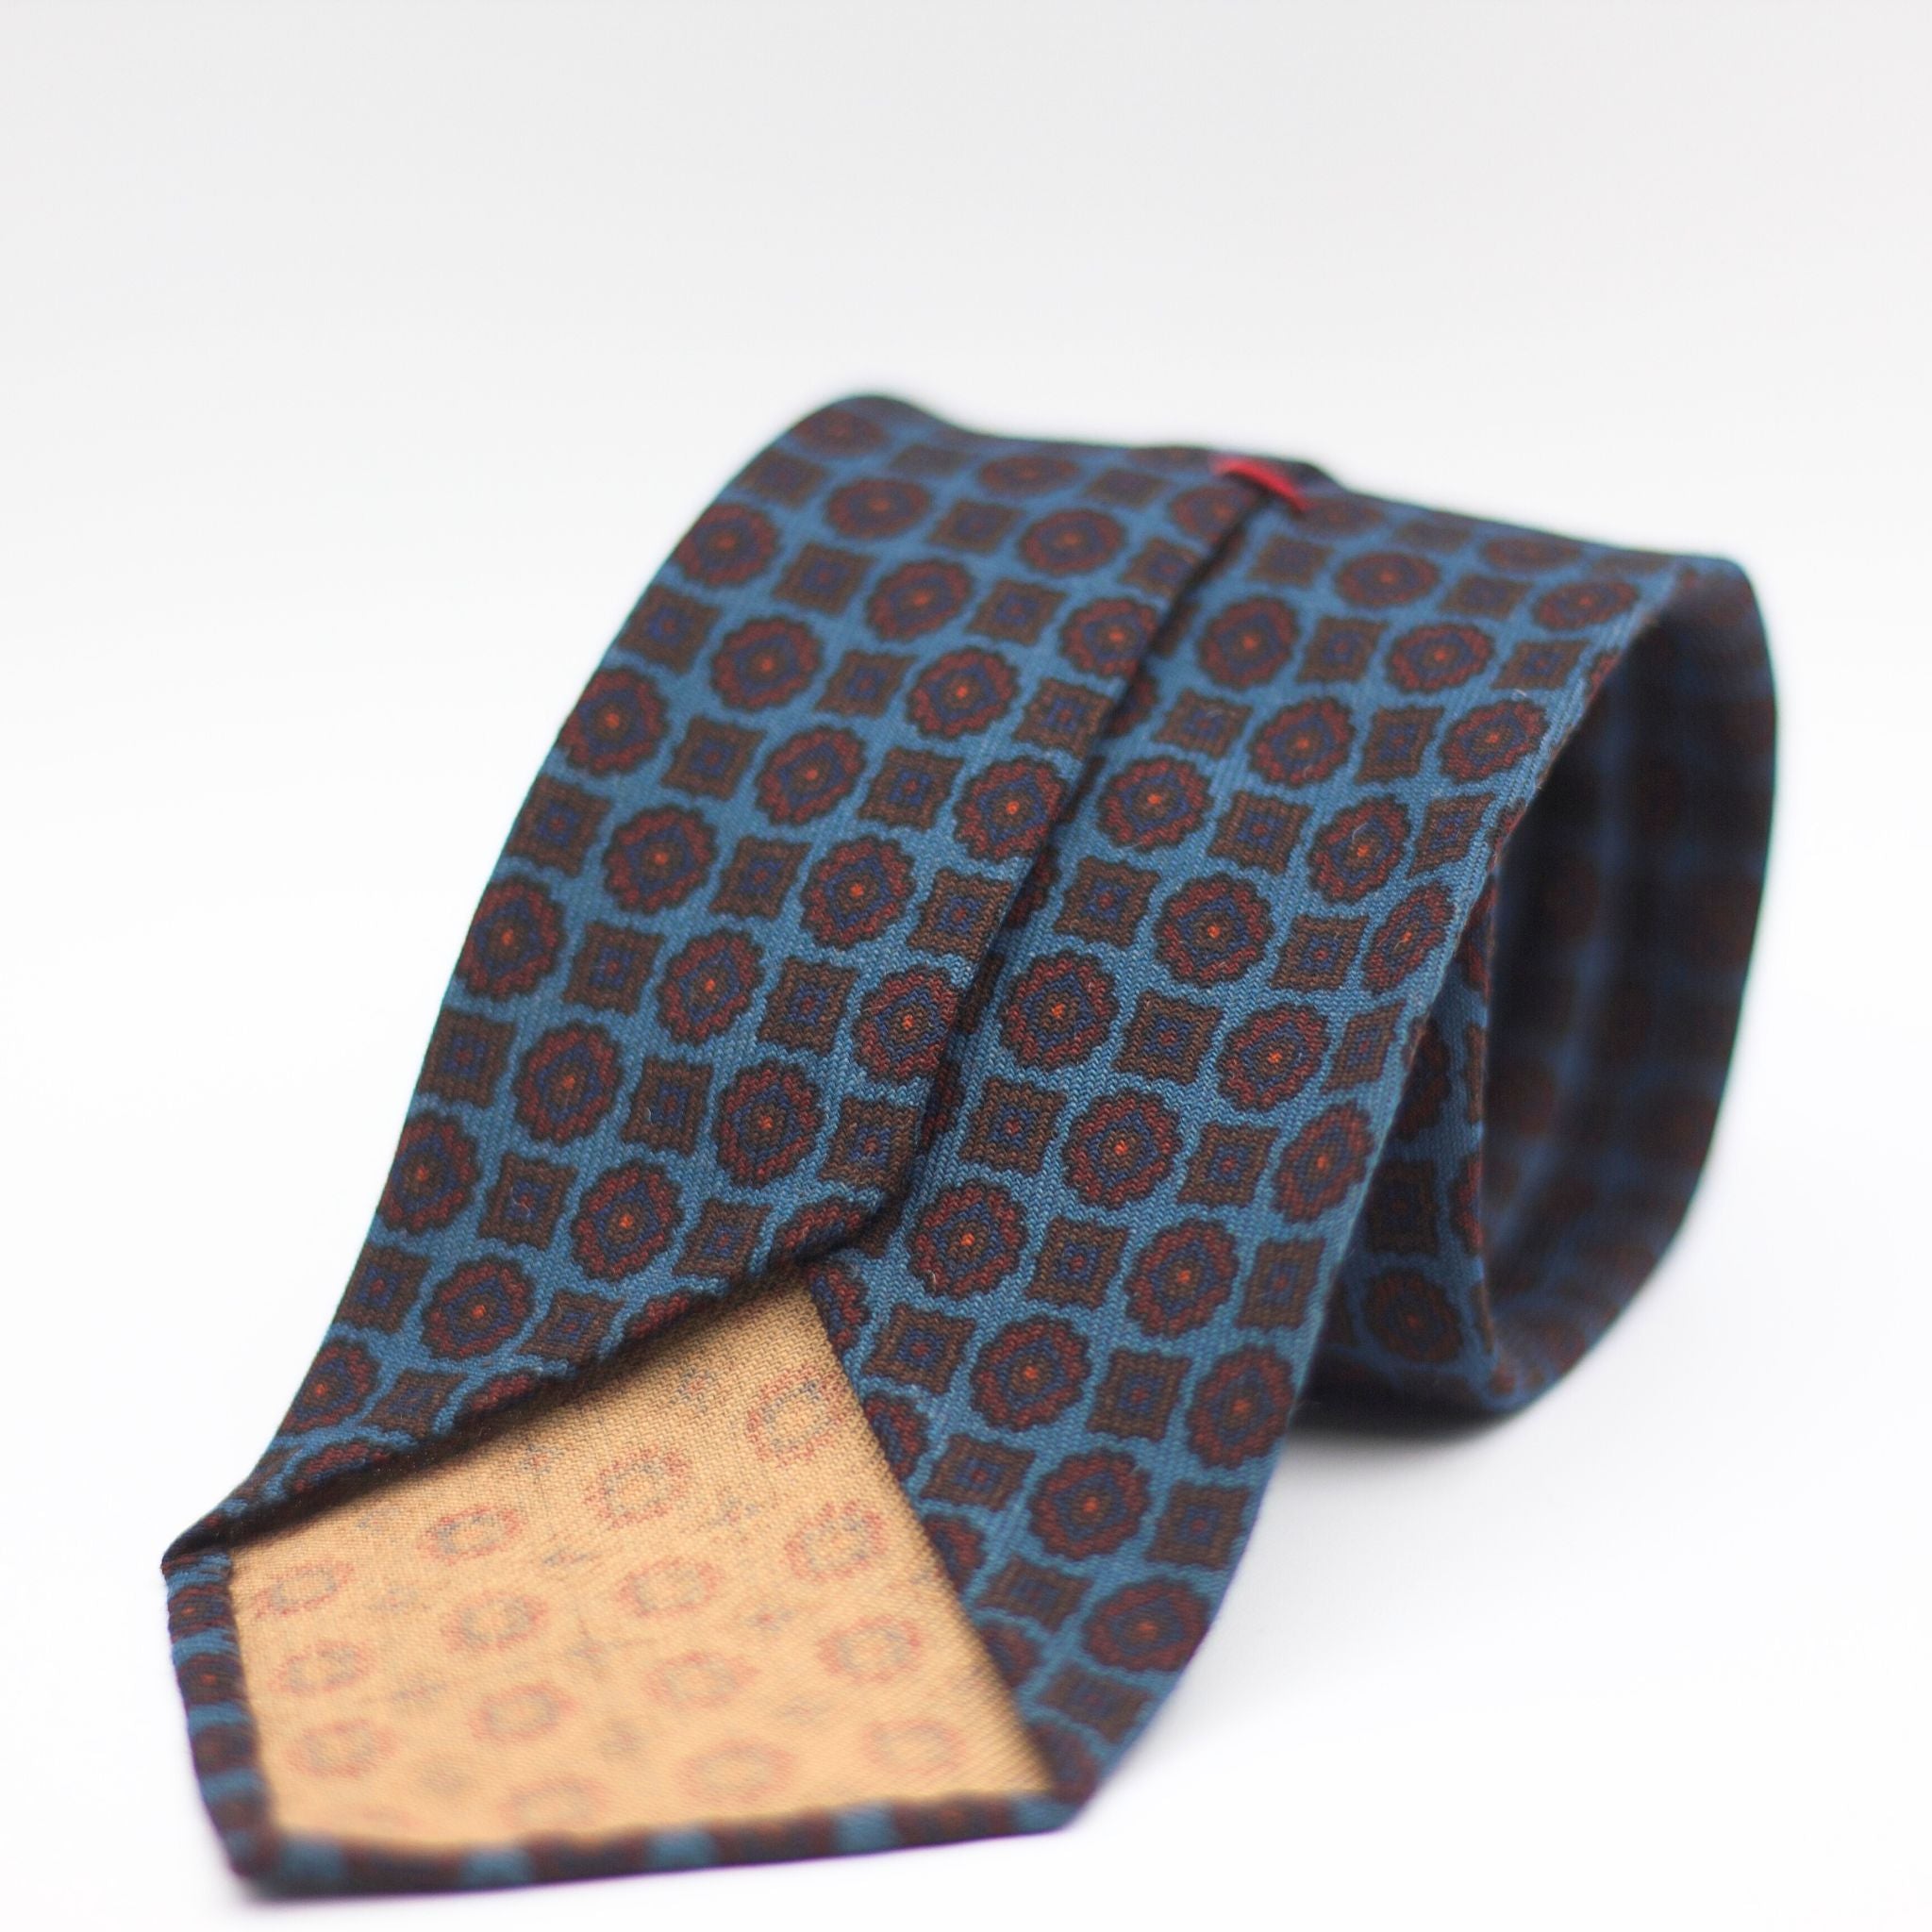 Cruciani & Bella 100%  Printed Wool  Unlined Hand rolled blades Light Blue, Burgundy and Brown Motifs Tie Handmade in Italy 8 cm x 150 cmCruciani & Bella 100%  Printed Wool  Unlined Hand rolled blades Light Blue, Burgundy and Brown Motifs Tie Handmade in Italy 8 cm x 150 cm